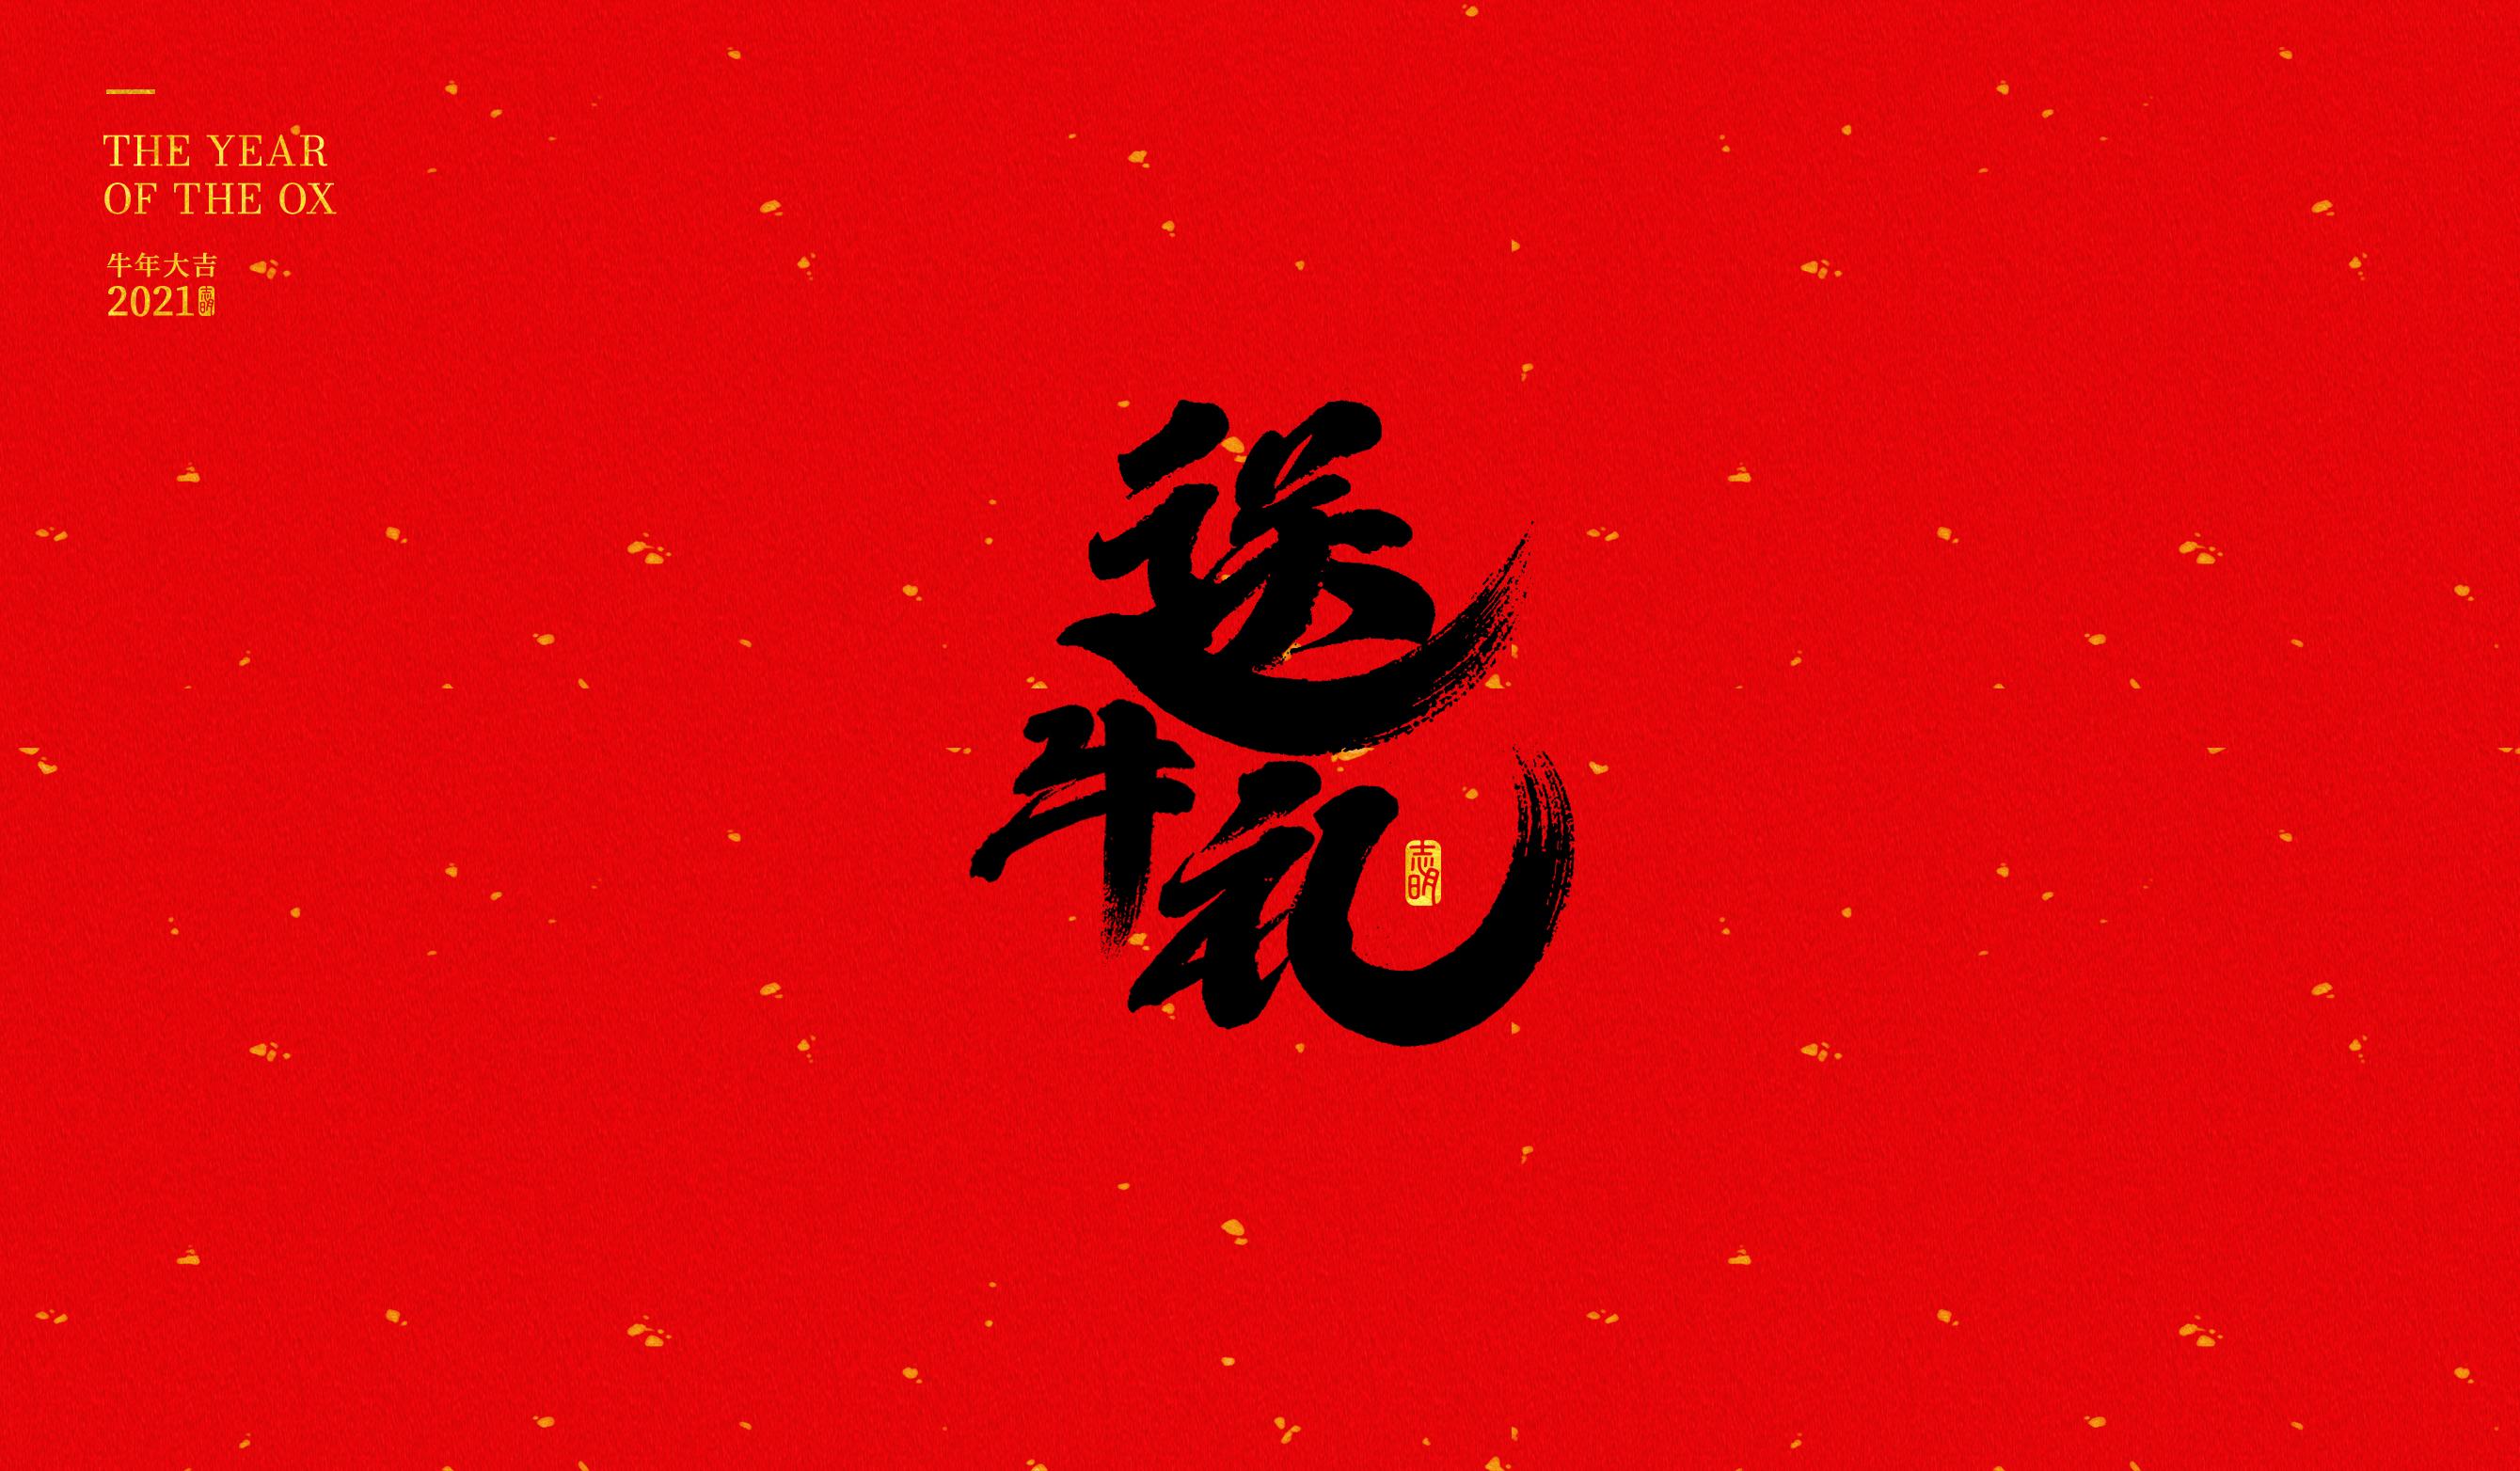 Year of the Ox greetings free commercial fonts